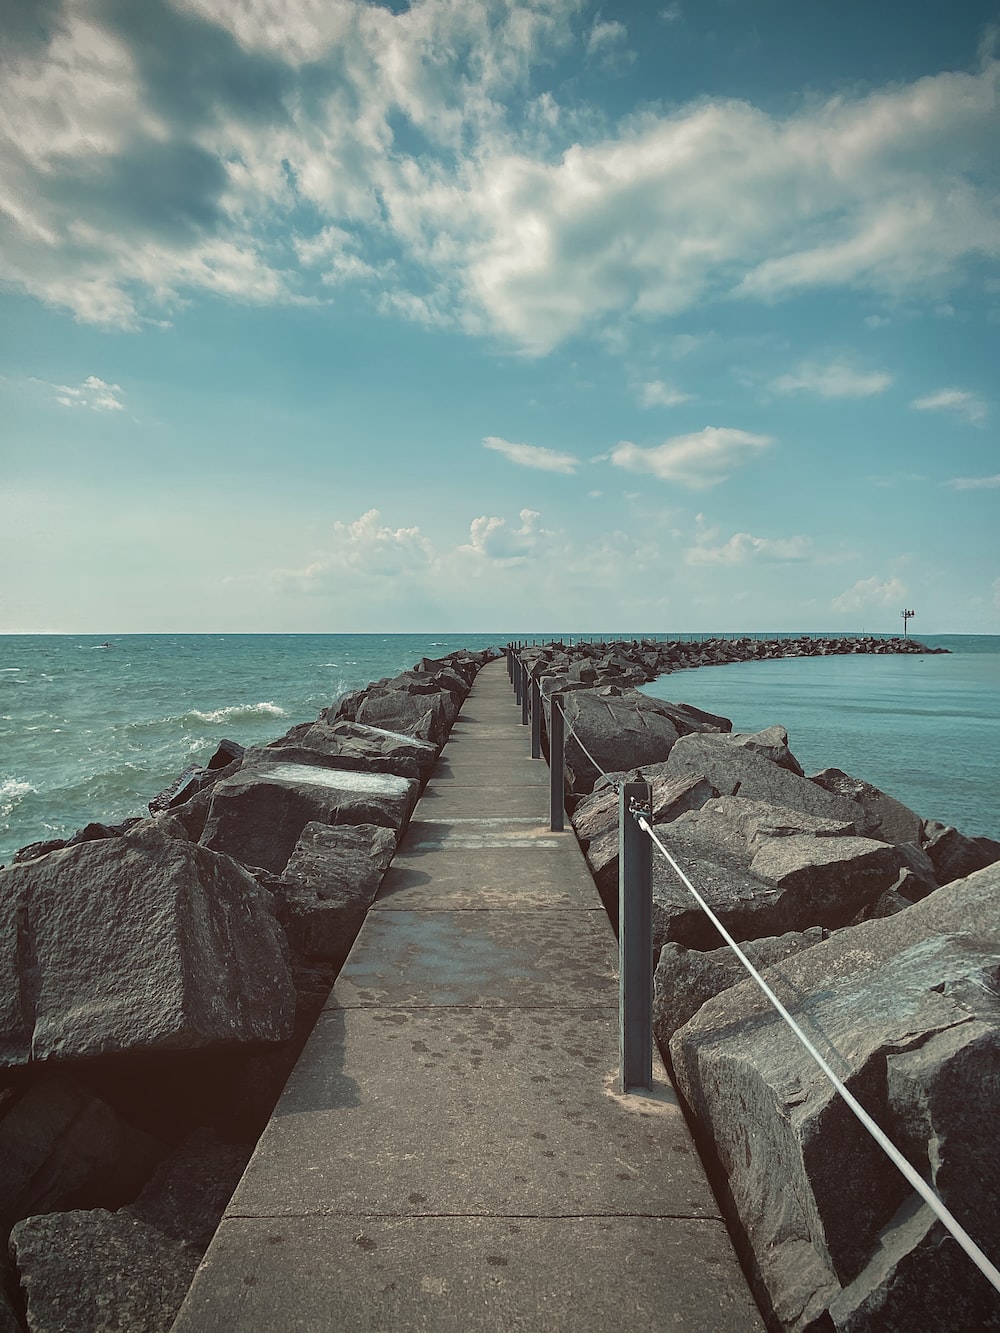 Lake Erie Picture. Download Free Image